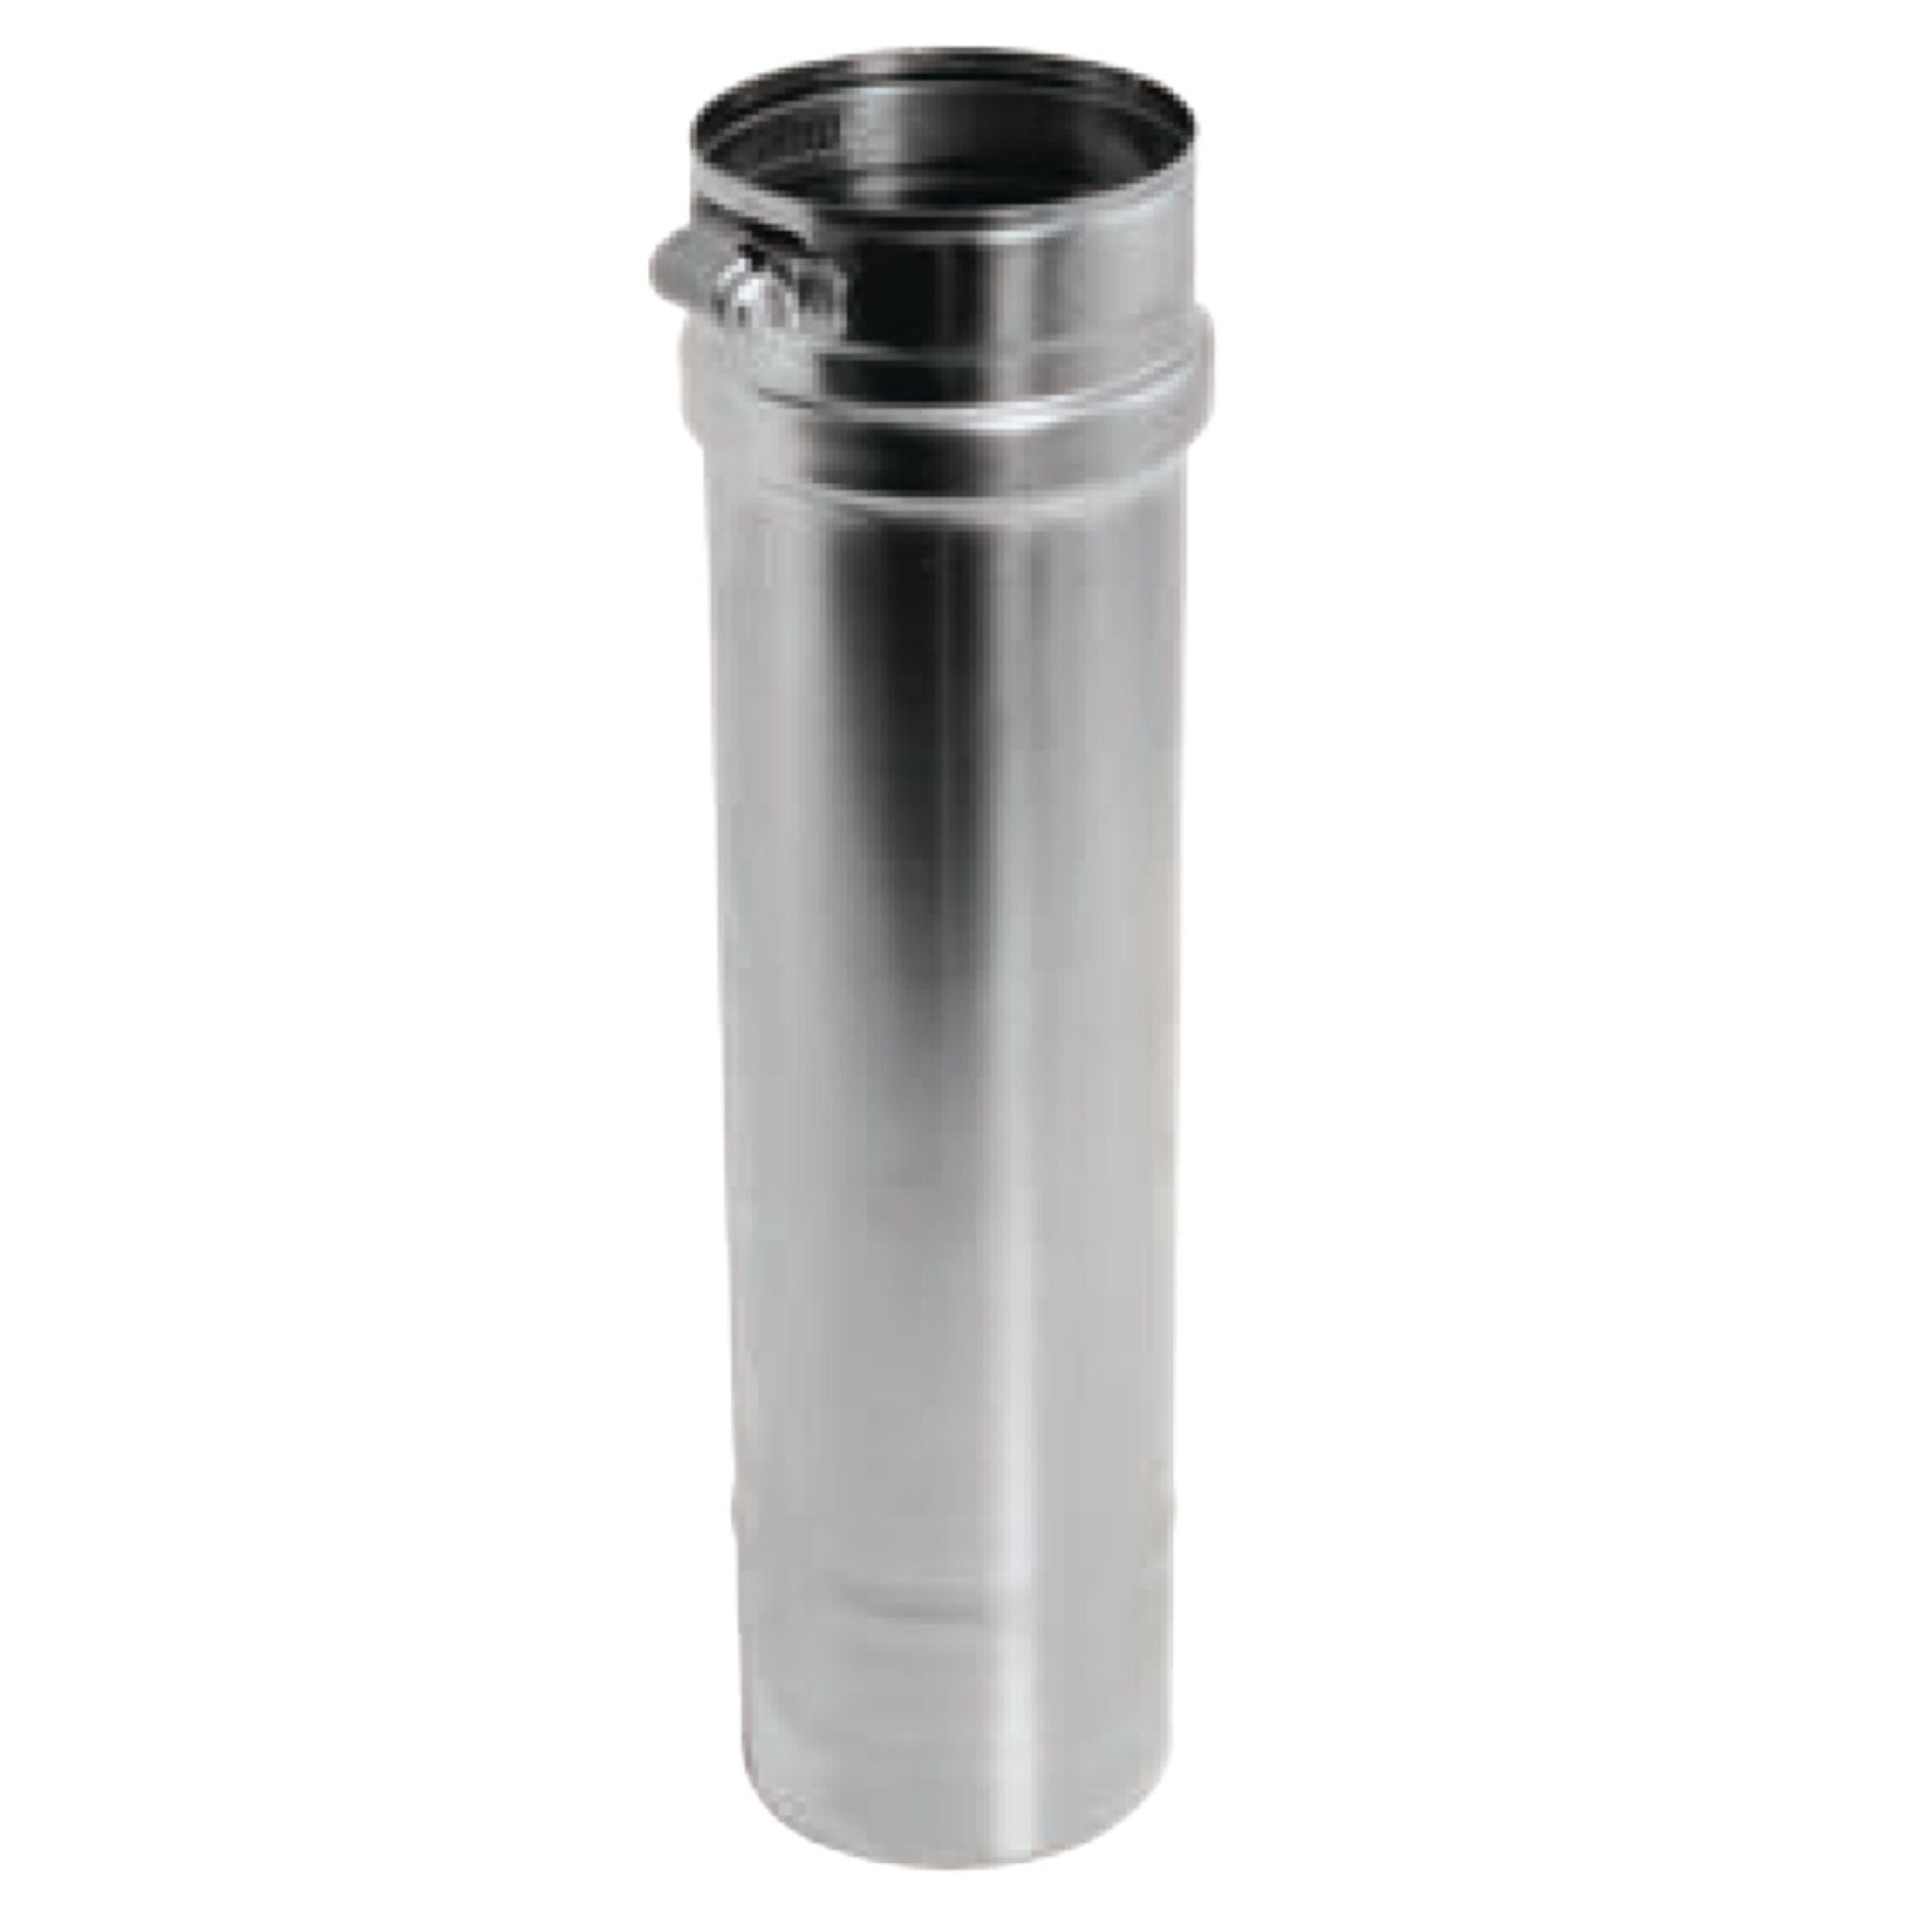 DuraVent FasNSeal 7" x 6" 29-4C Stainless Steel Vent Length